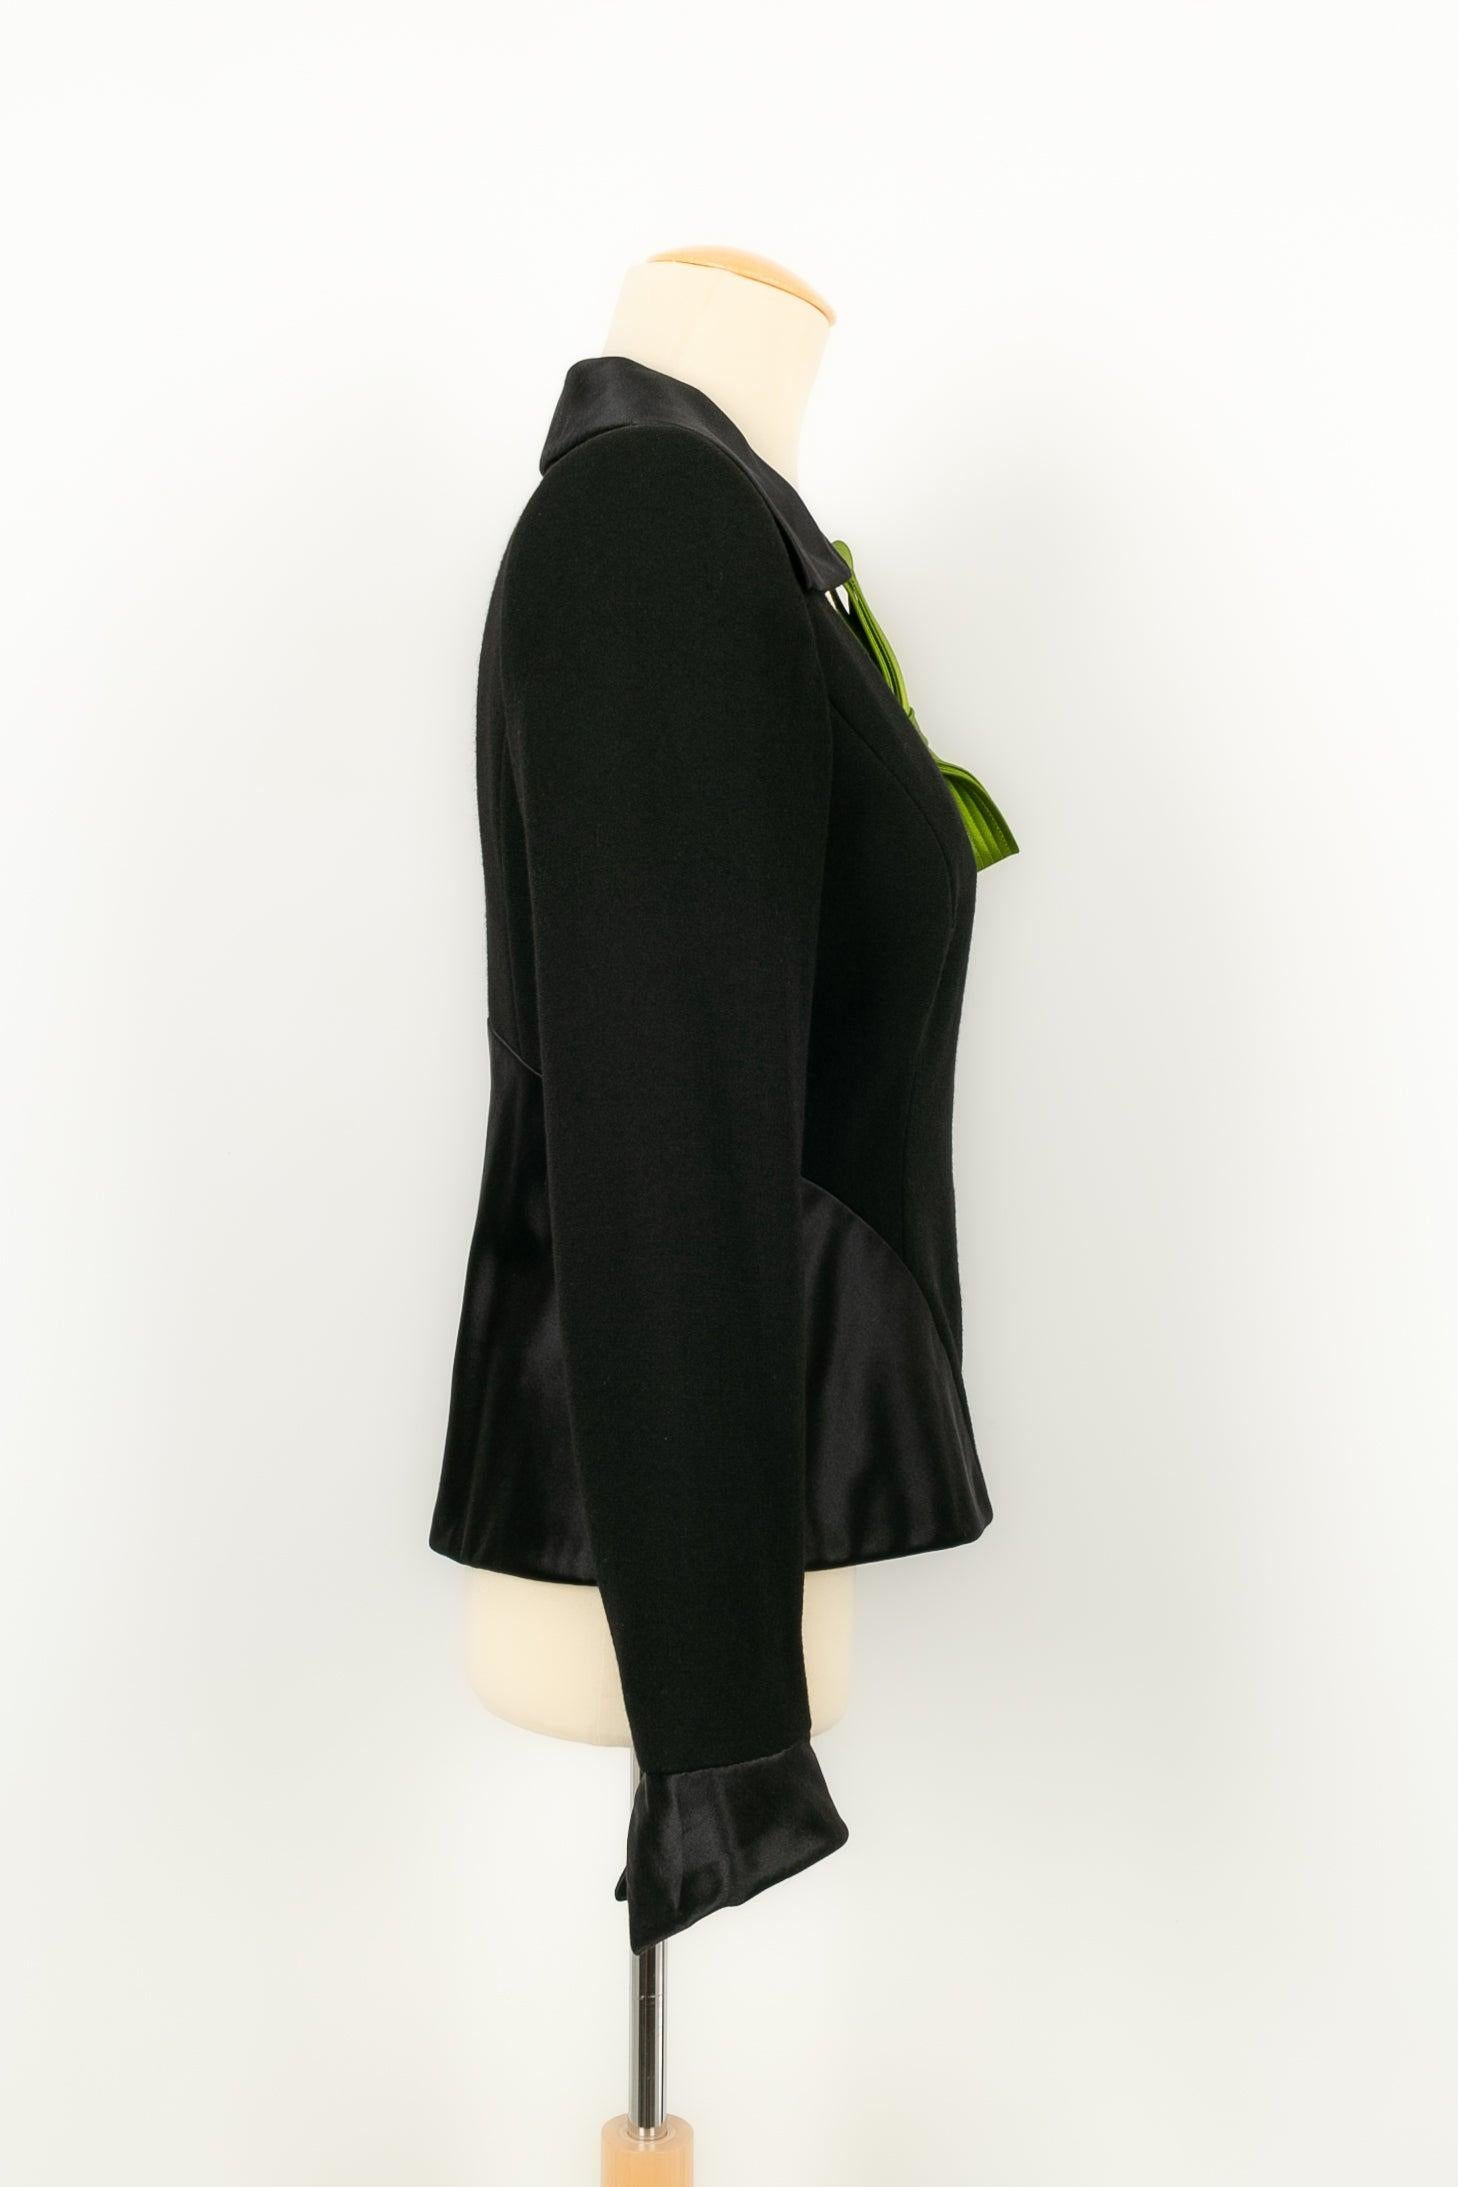 Christian Lacroix Haute Couture Set Composed of Black Jacket and Brooch For Sale 1